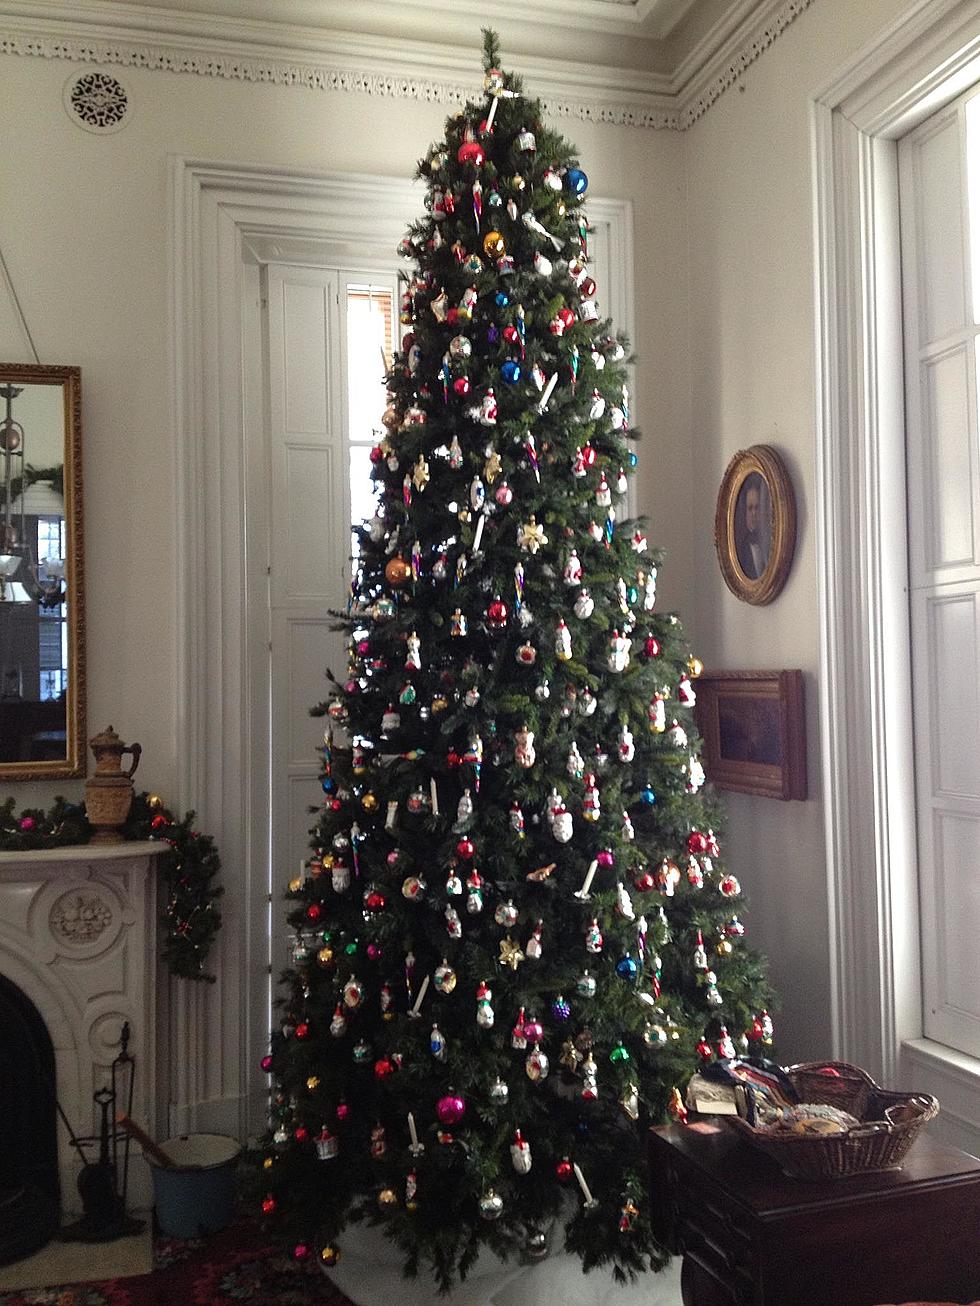 Did You Know You Can Tour 130 Decorated Trees All In One Historical Wisconsin House?